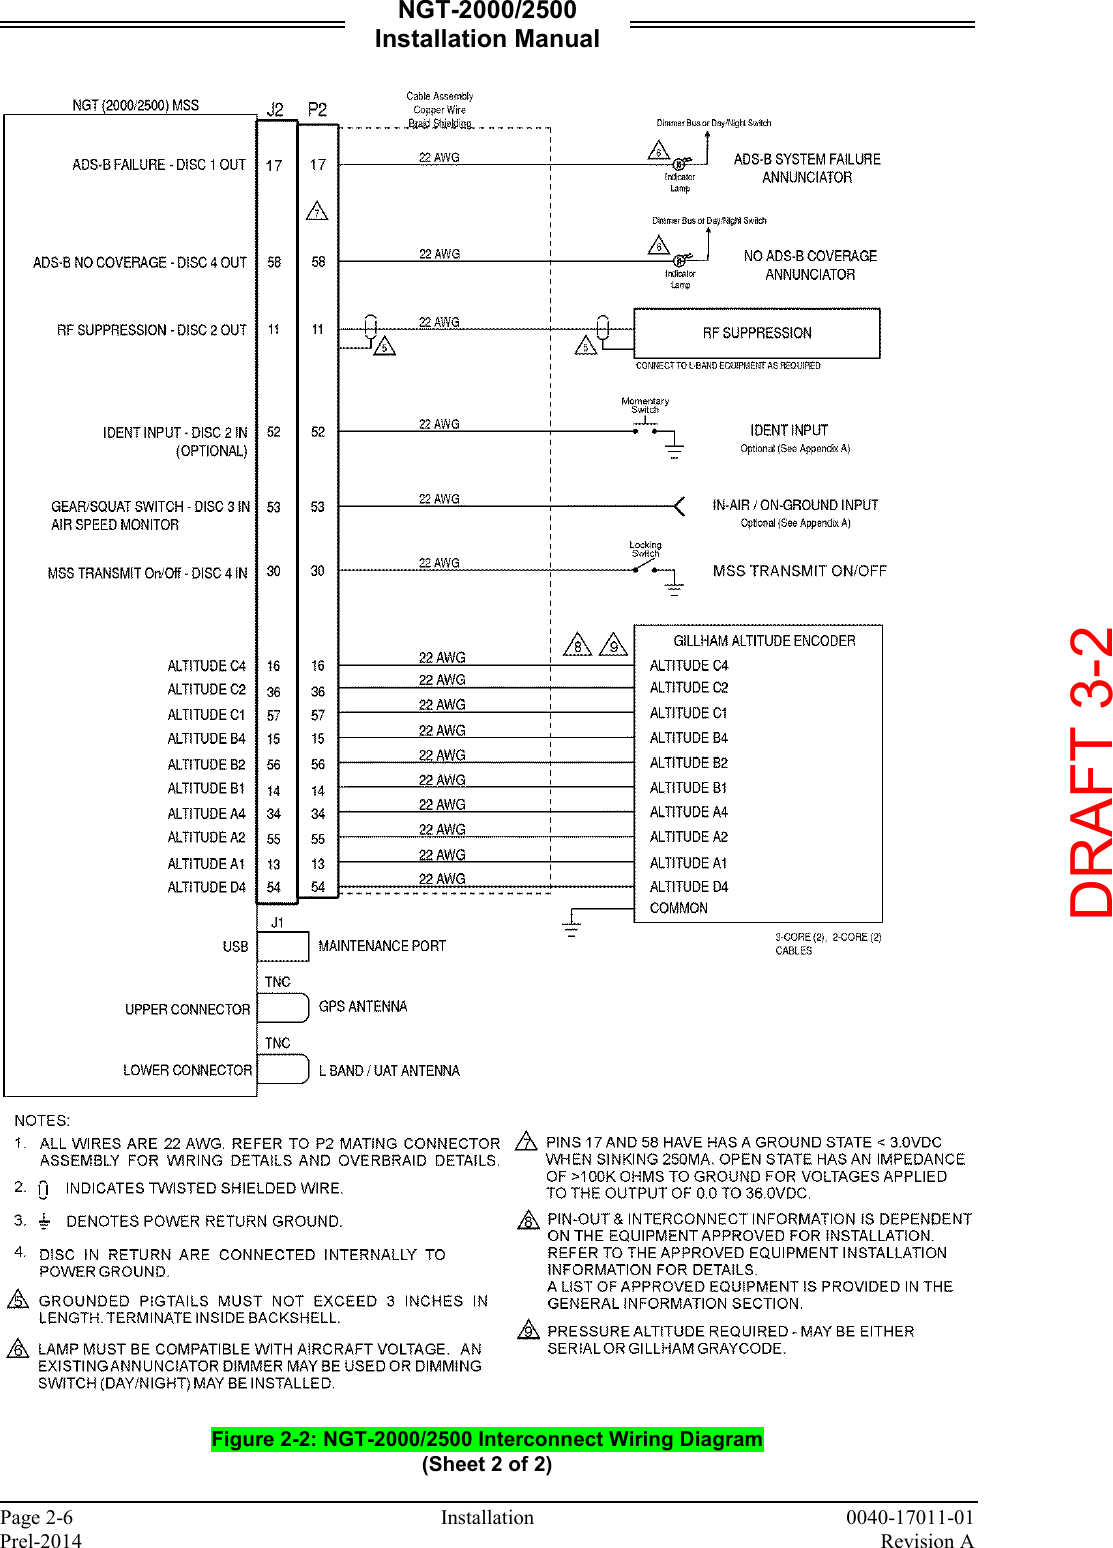 NGT-2000/2500 Installation Manual  Page 2-6     Installation 0040-17011-01 Prel-2014    Revision A    Figure 2-2: NGT-2000/2500 Interconnect Wiring Diagram (Sheet 2 of 2)   DRAFT 3-2